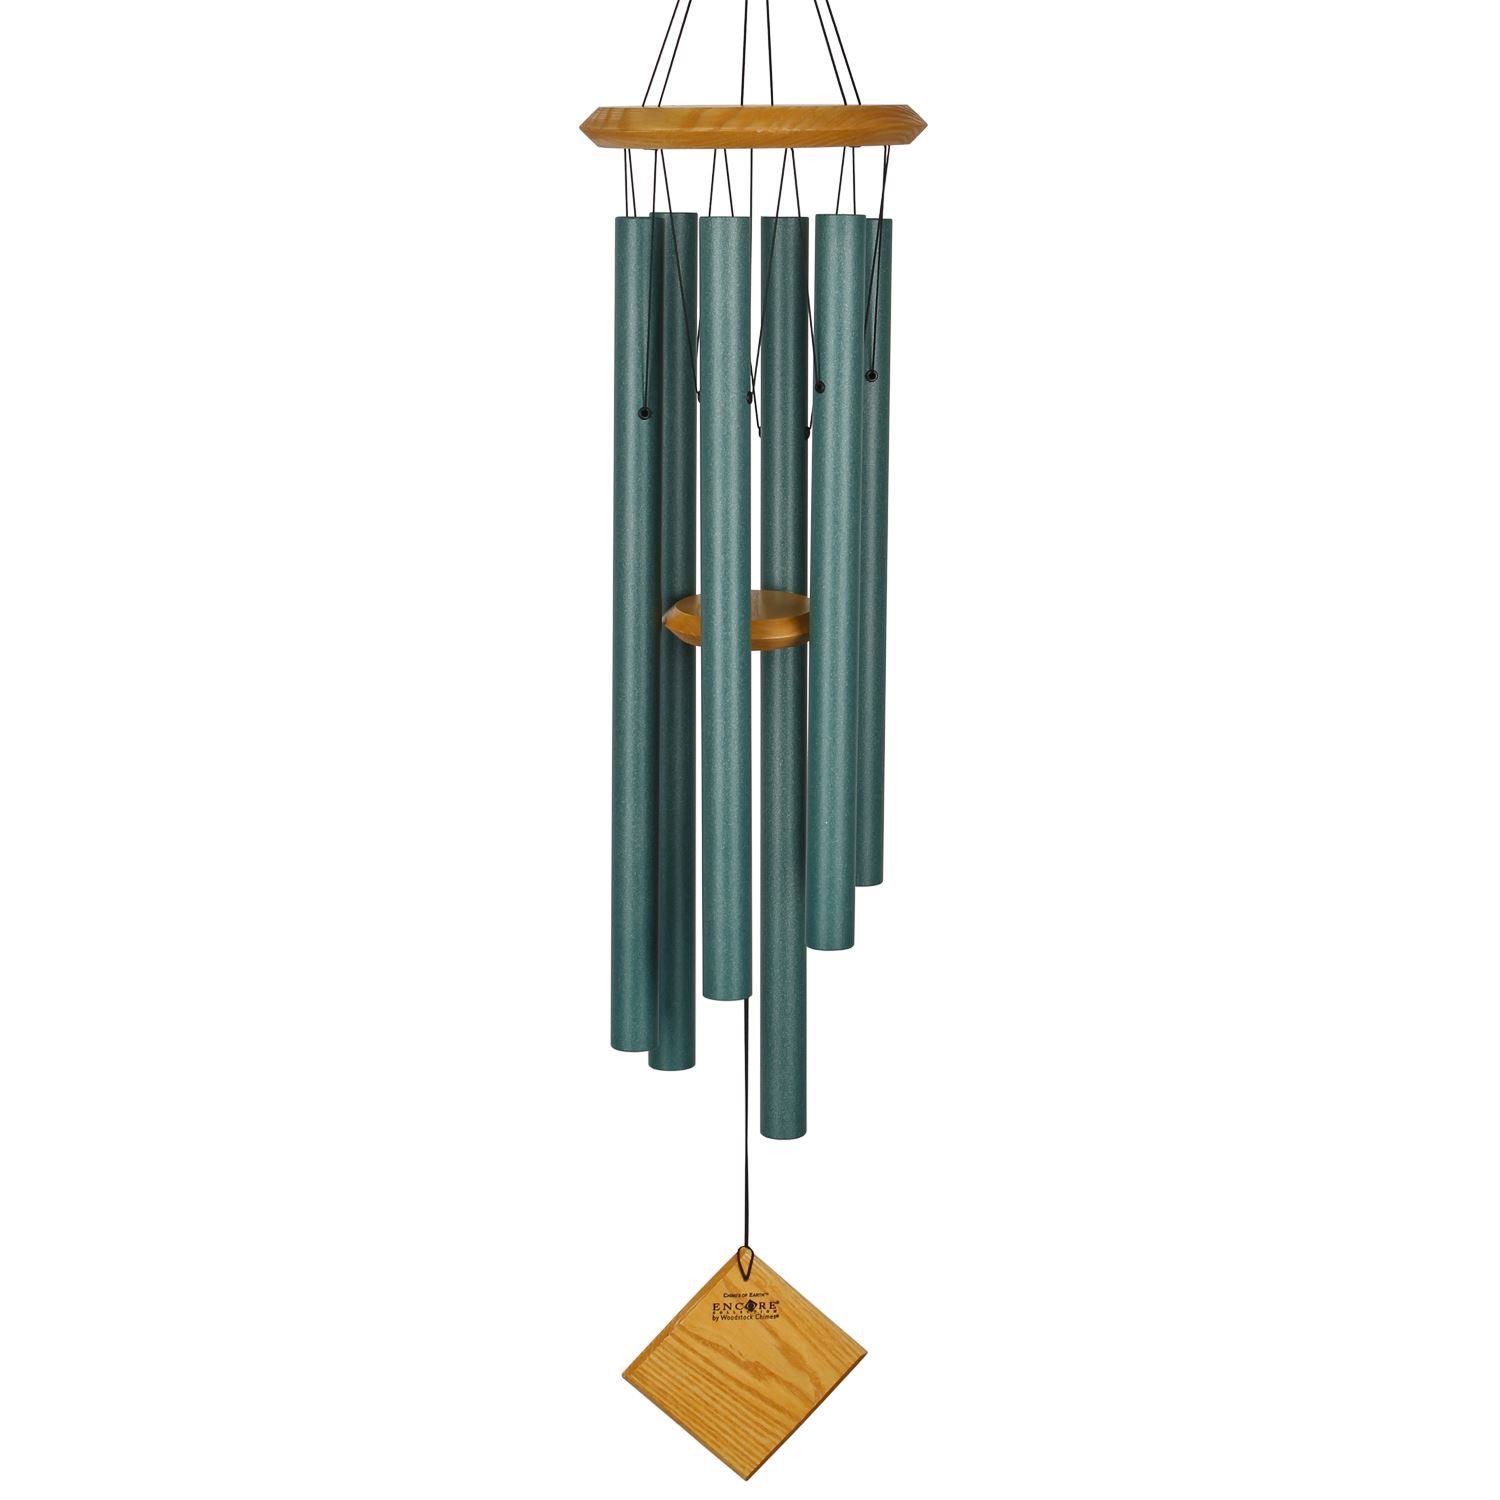 Woodstock Encore Collection Earth Wind Chime - Verdigris, 37"